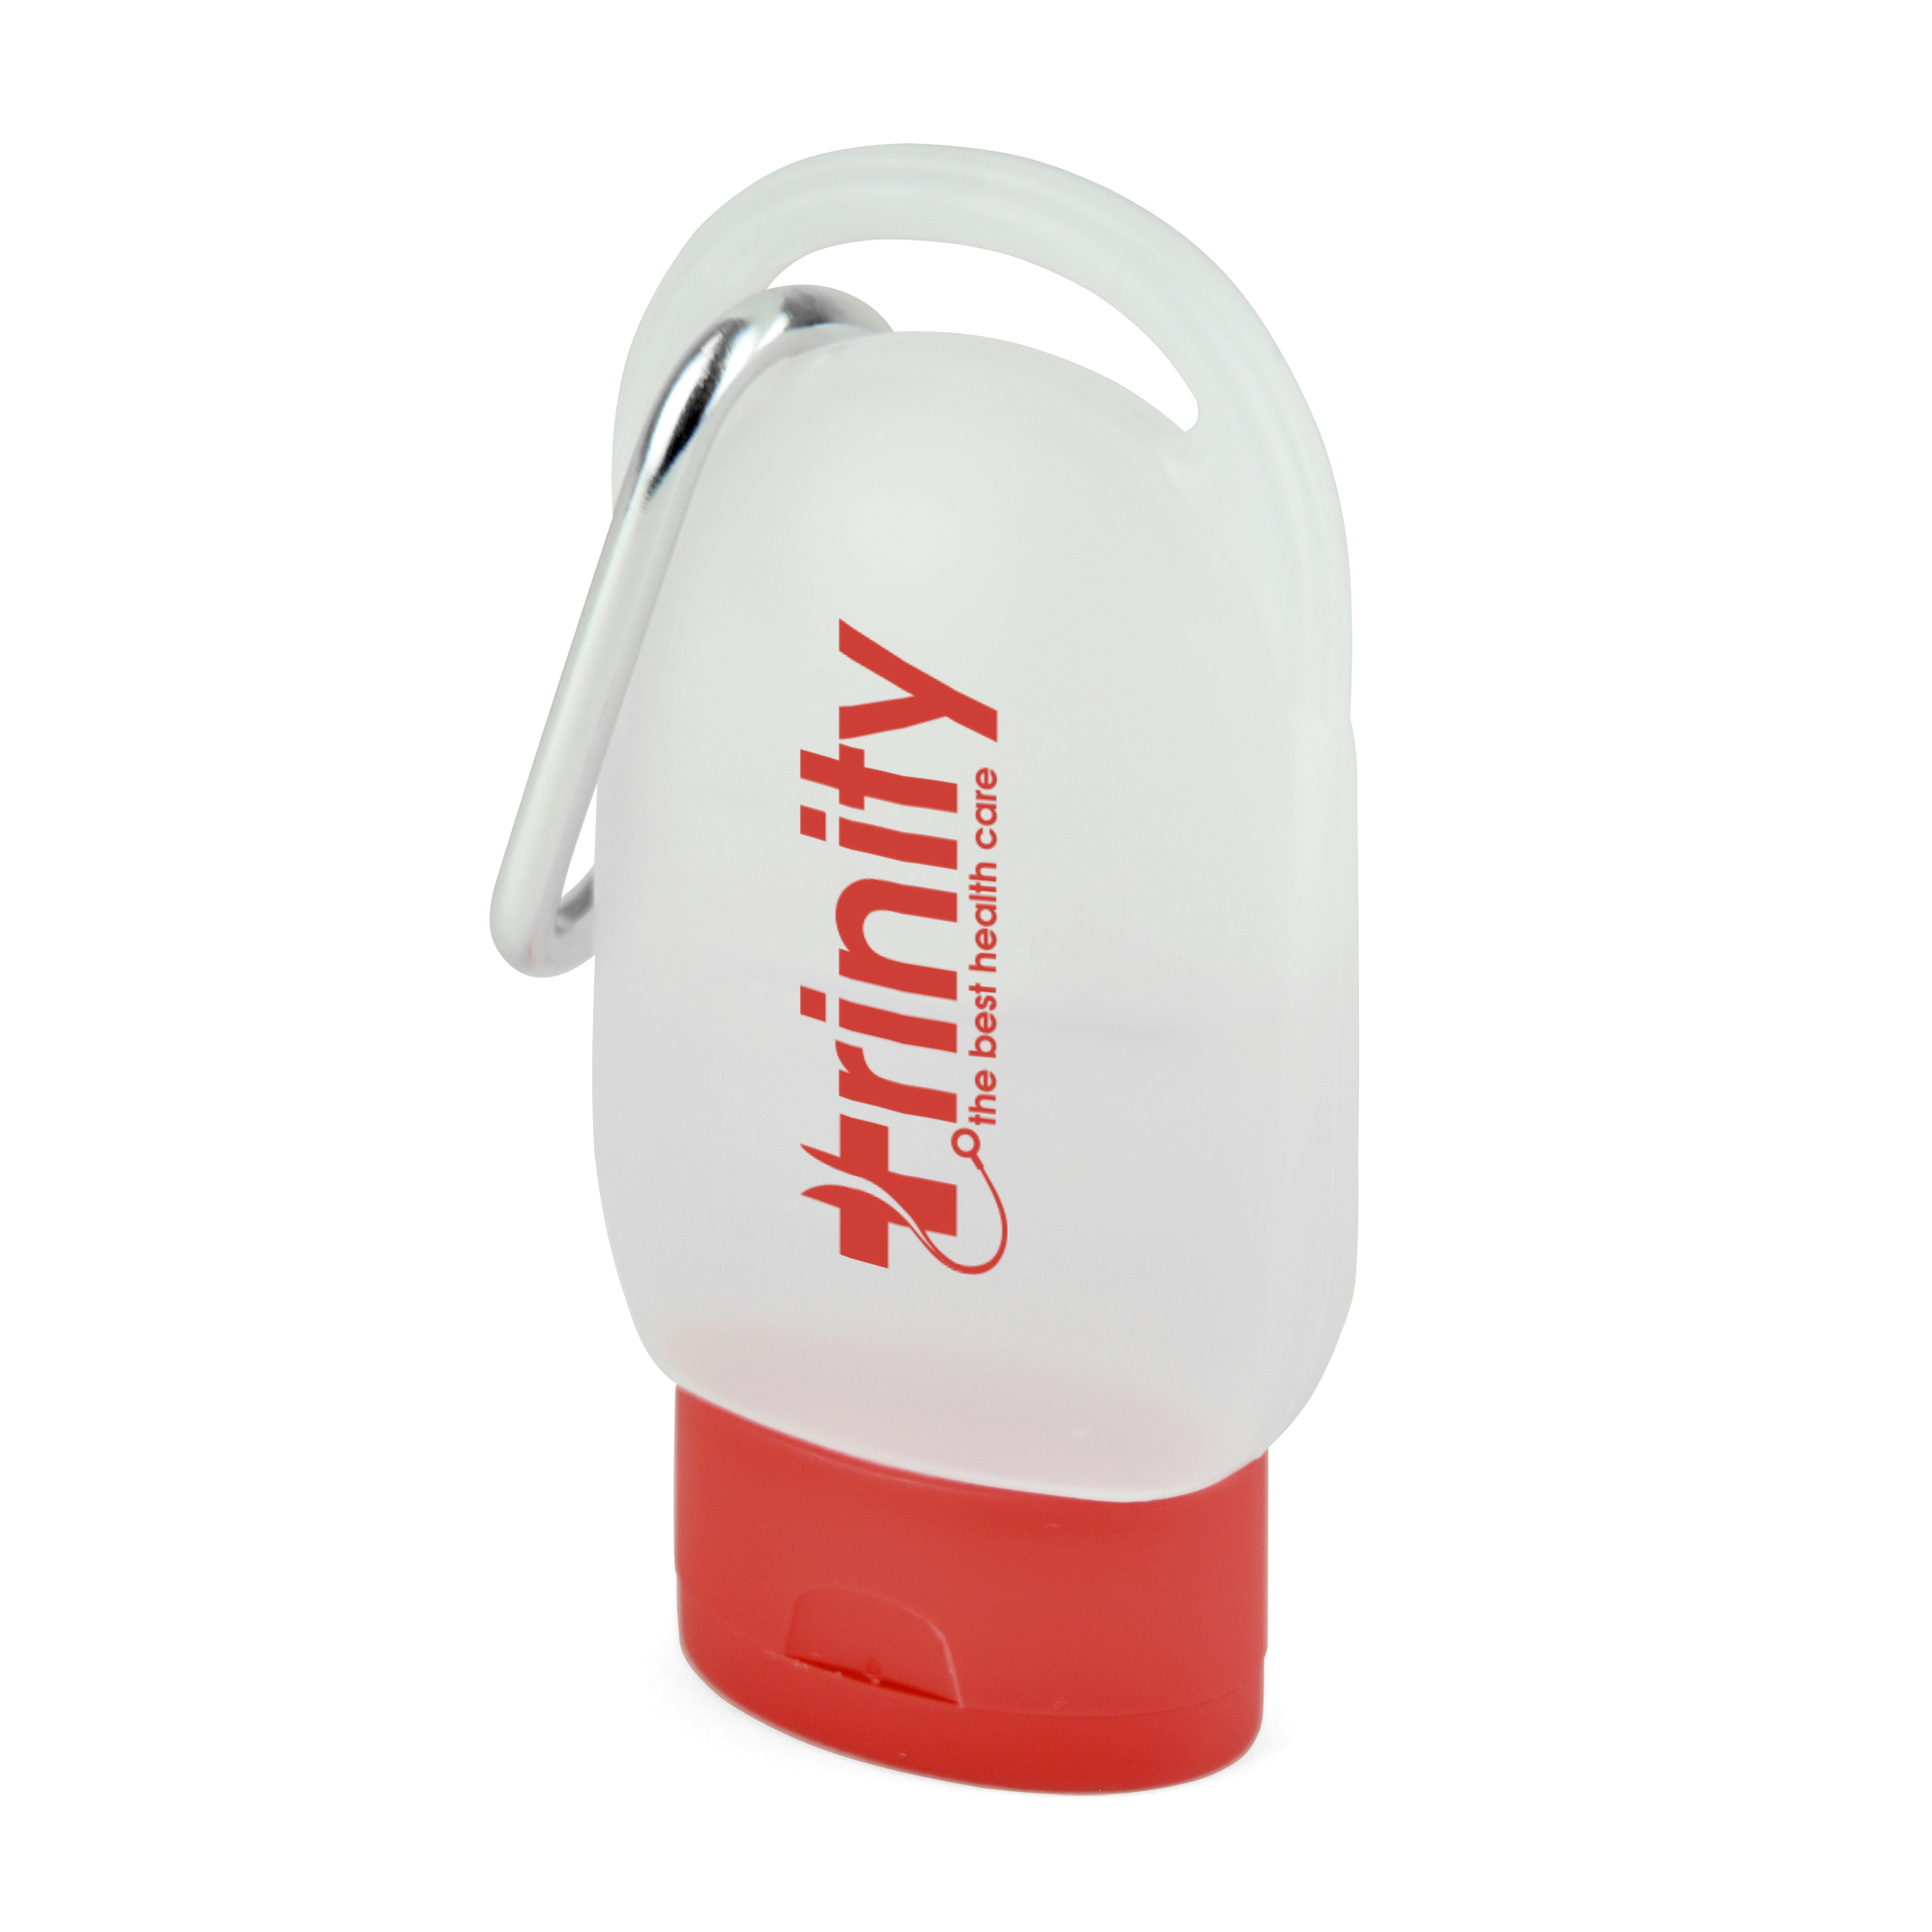 30ml pocket size hand sanitiser in a clear plastic casing with coloured lid and silver carabiner clip. Contains 62% alcohol.